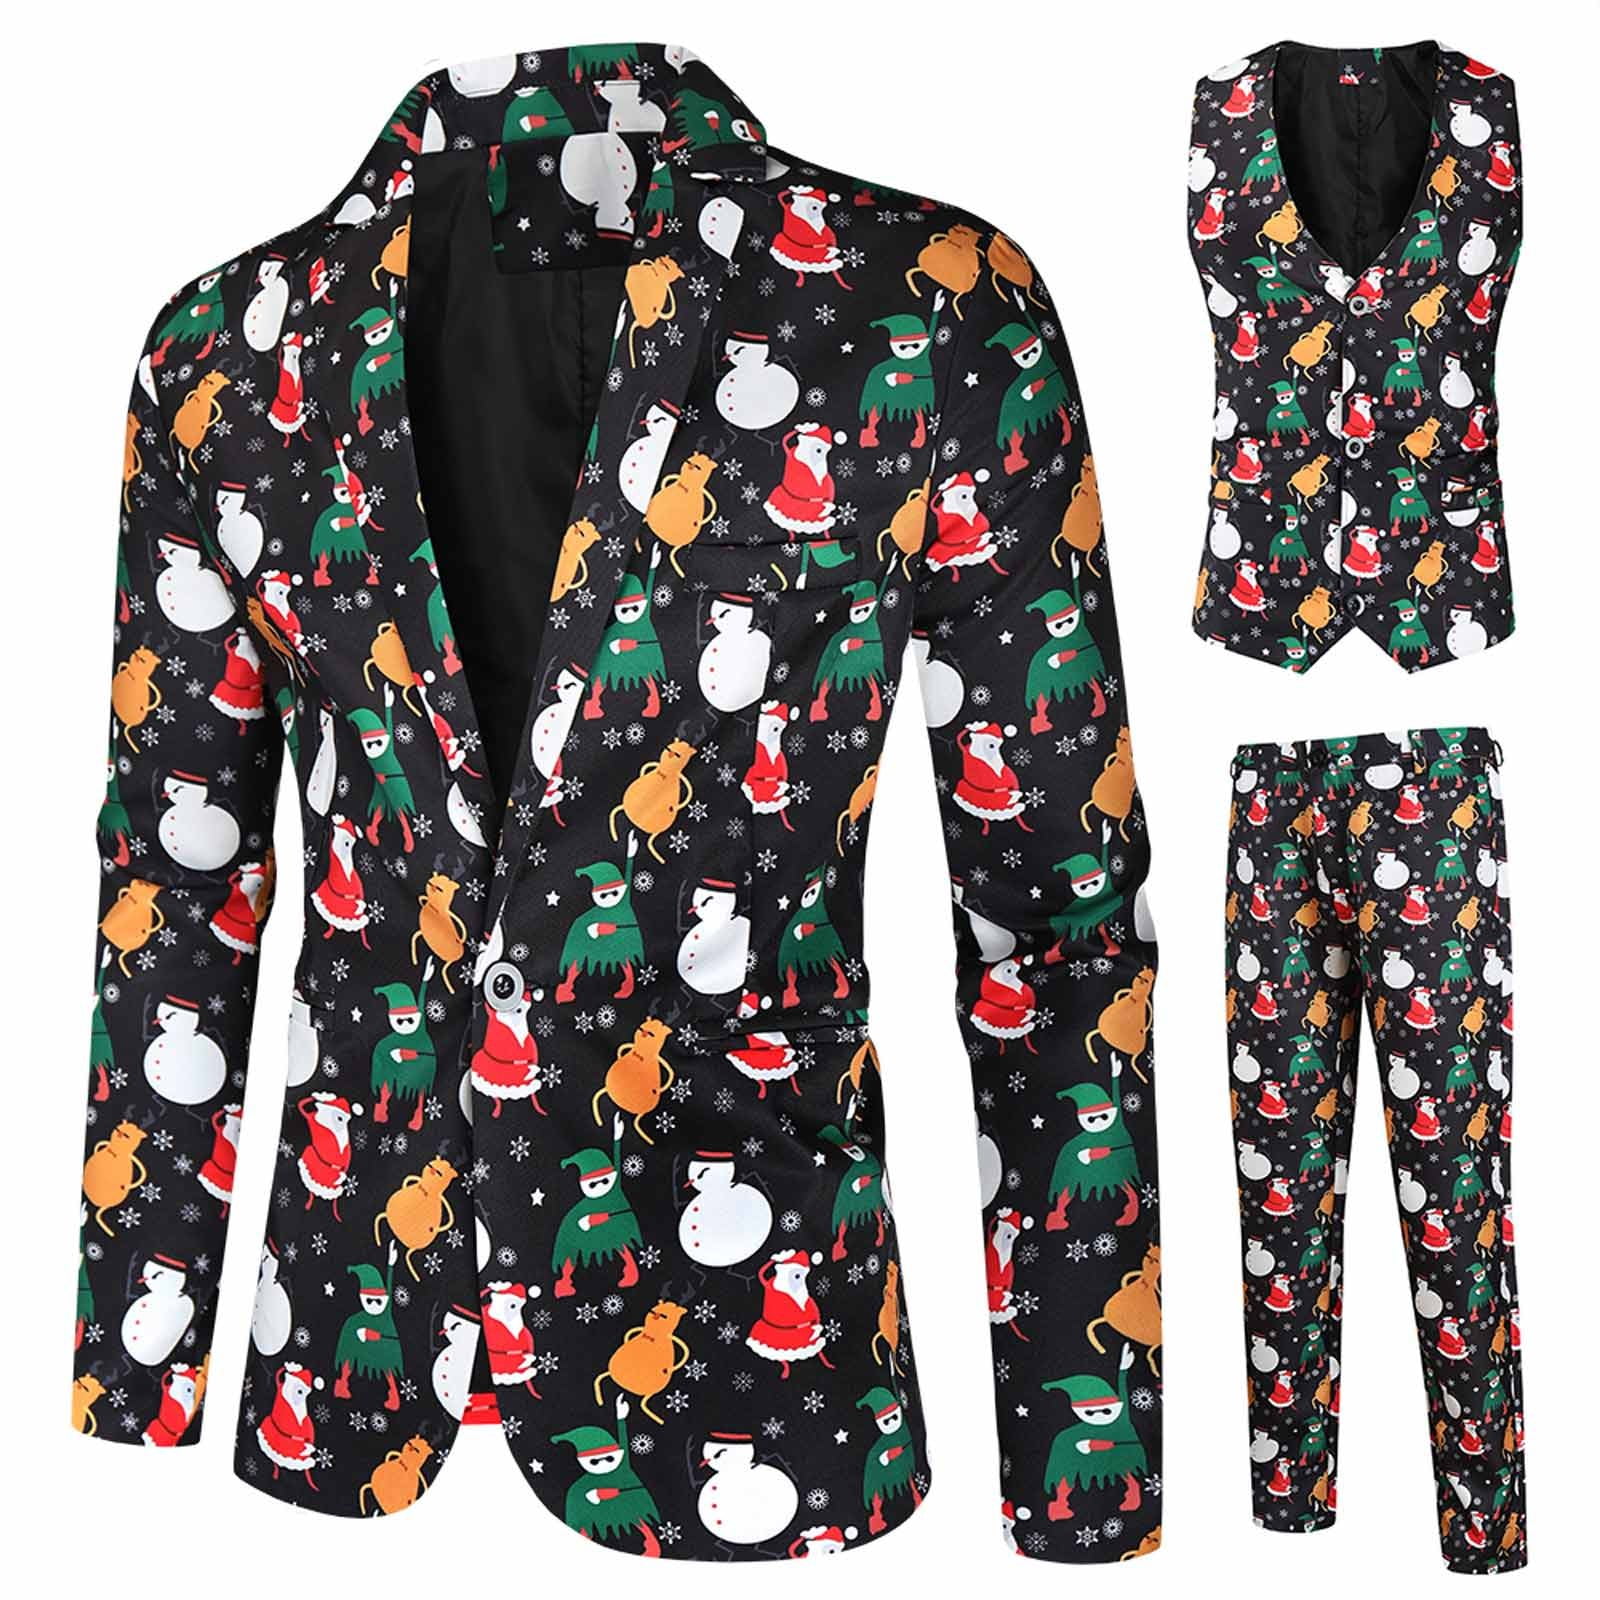 Mourn Manufacturing Smooth Lanhui Mens Christmas Suit Different Prints Xmas Costume Include Jacket  Pants Waistcoat - Walmart.com